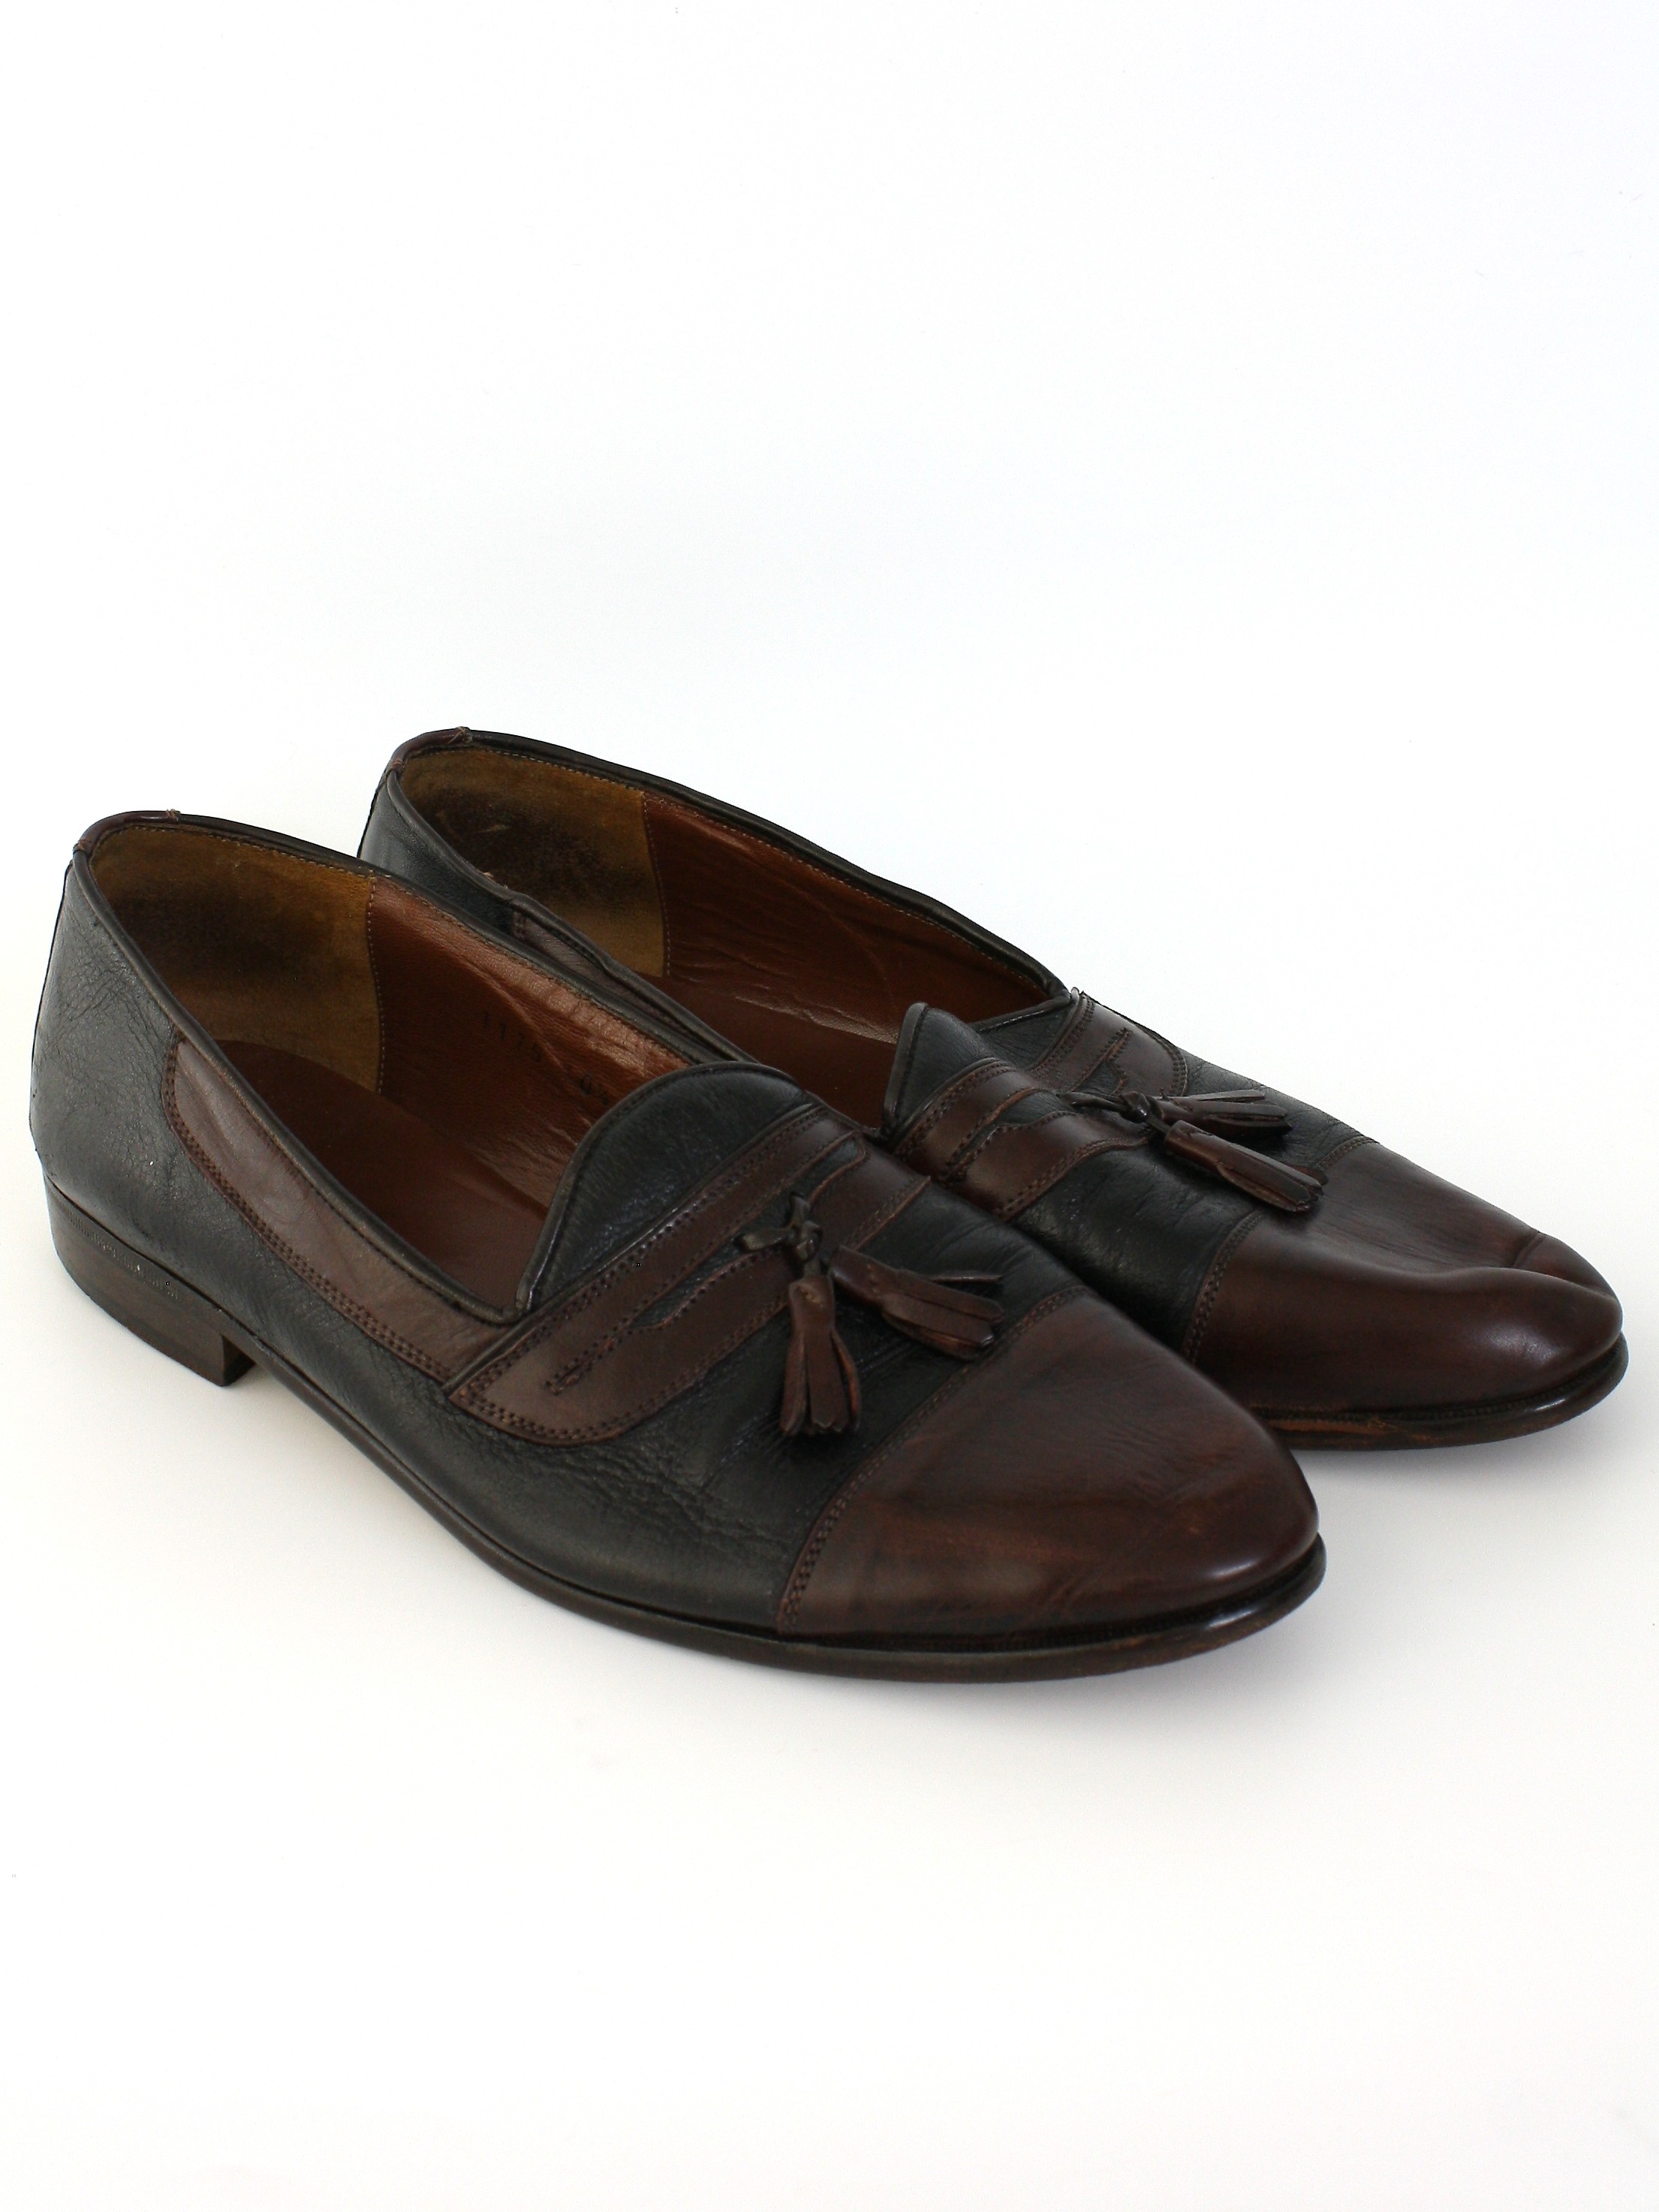 Nineties Vintage Shoes: 90s -Made in Italy- Mens pieced two tone brown ...